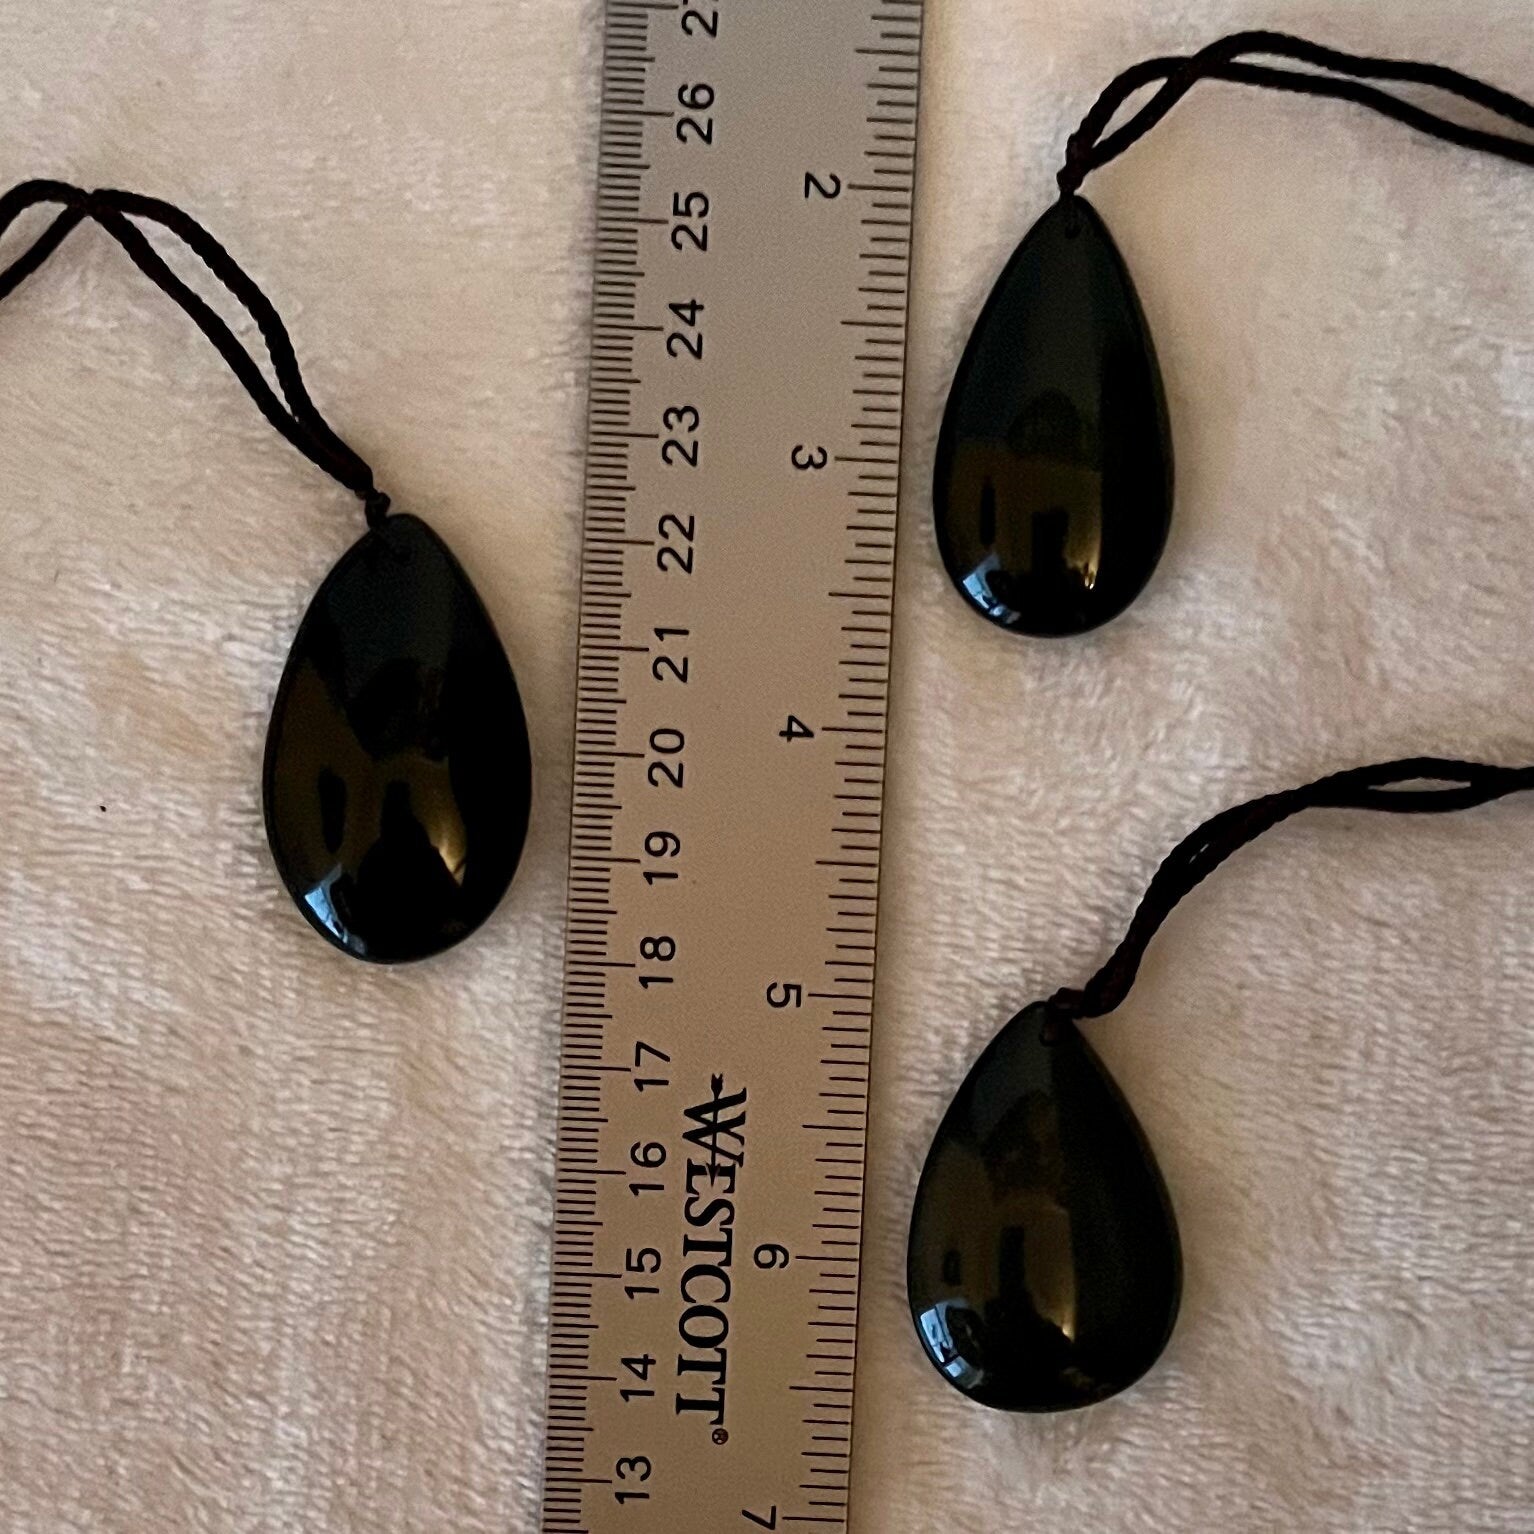 3 Iridescent rainbow obsidian tear drop pendant necklaces, showcasing a spectrum of captivating hues, gracefully hung from asjustable black cords and displayed next to a ruler to show size.  Pendants are approximately 1 1/4” long